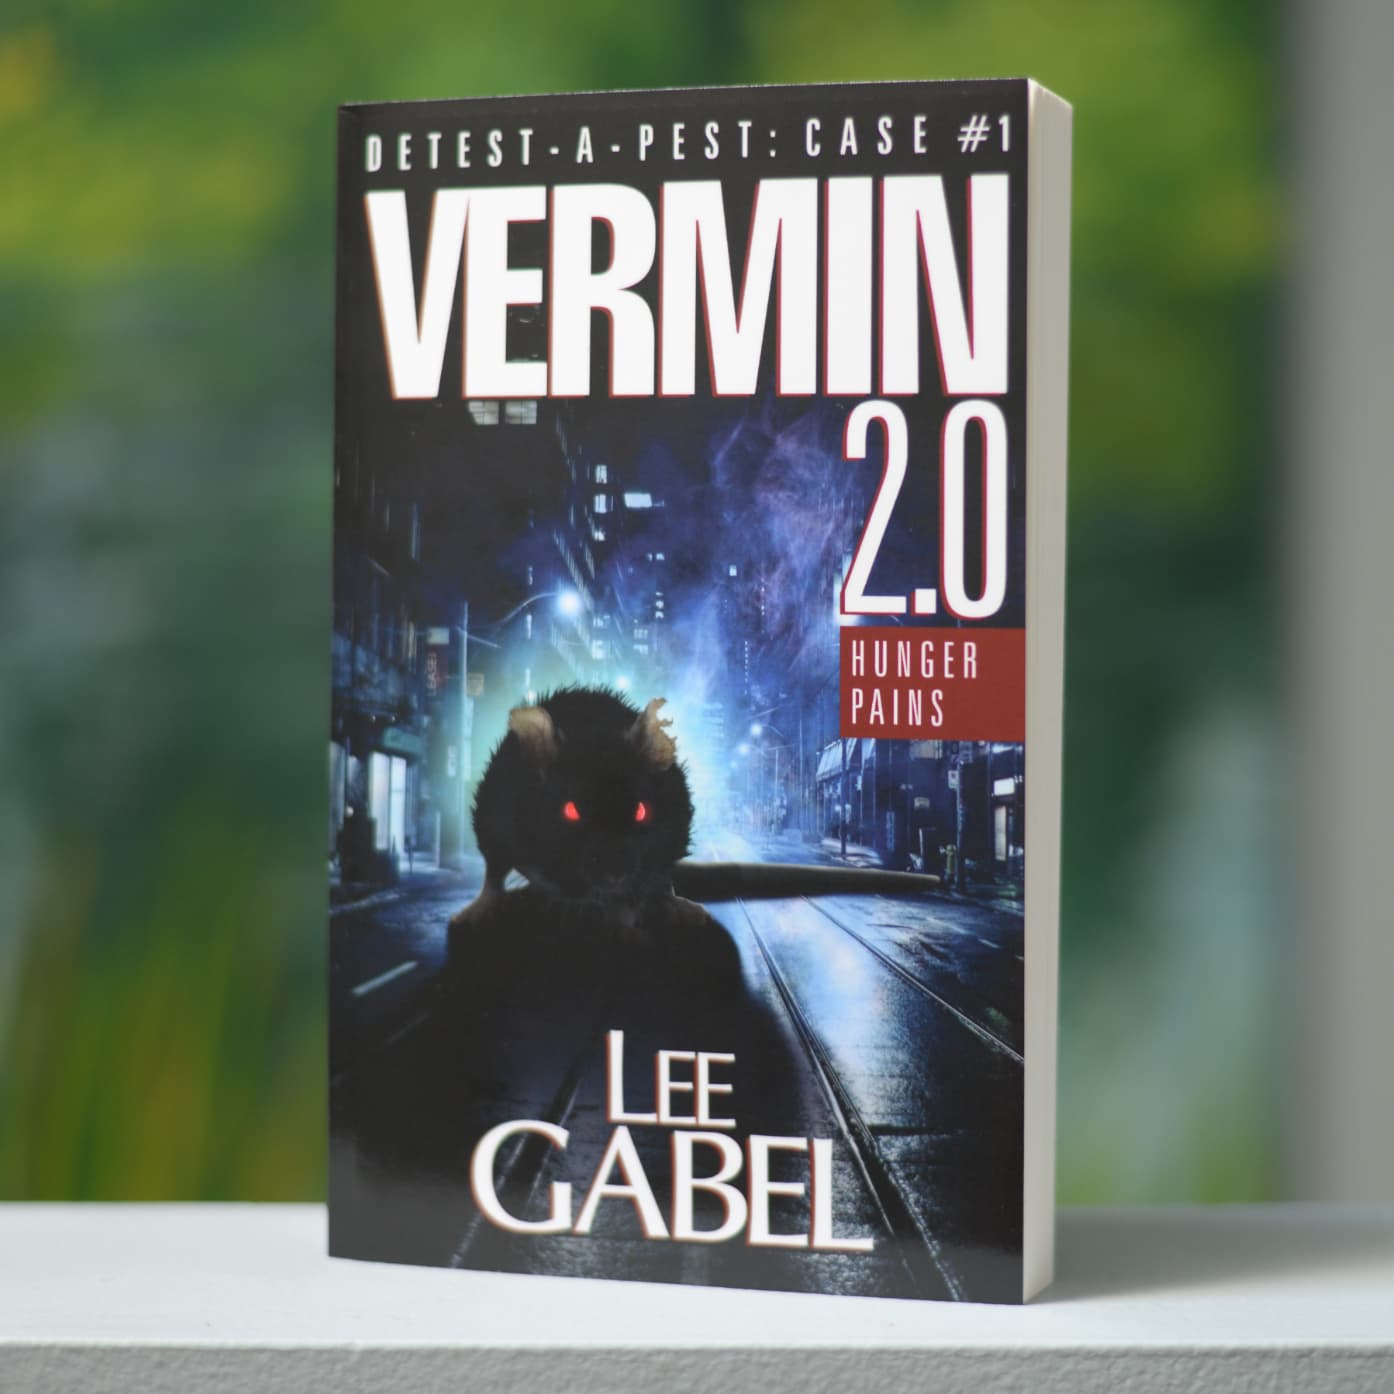 Vermin 2.0 actual paperback image (304 pages.)